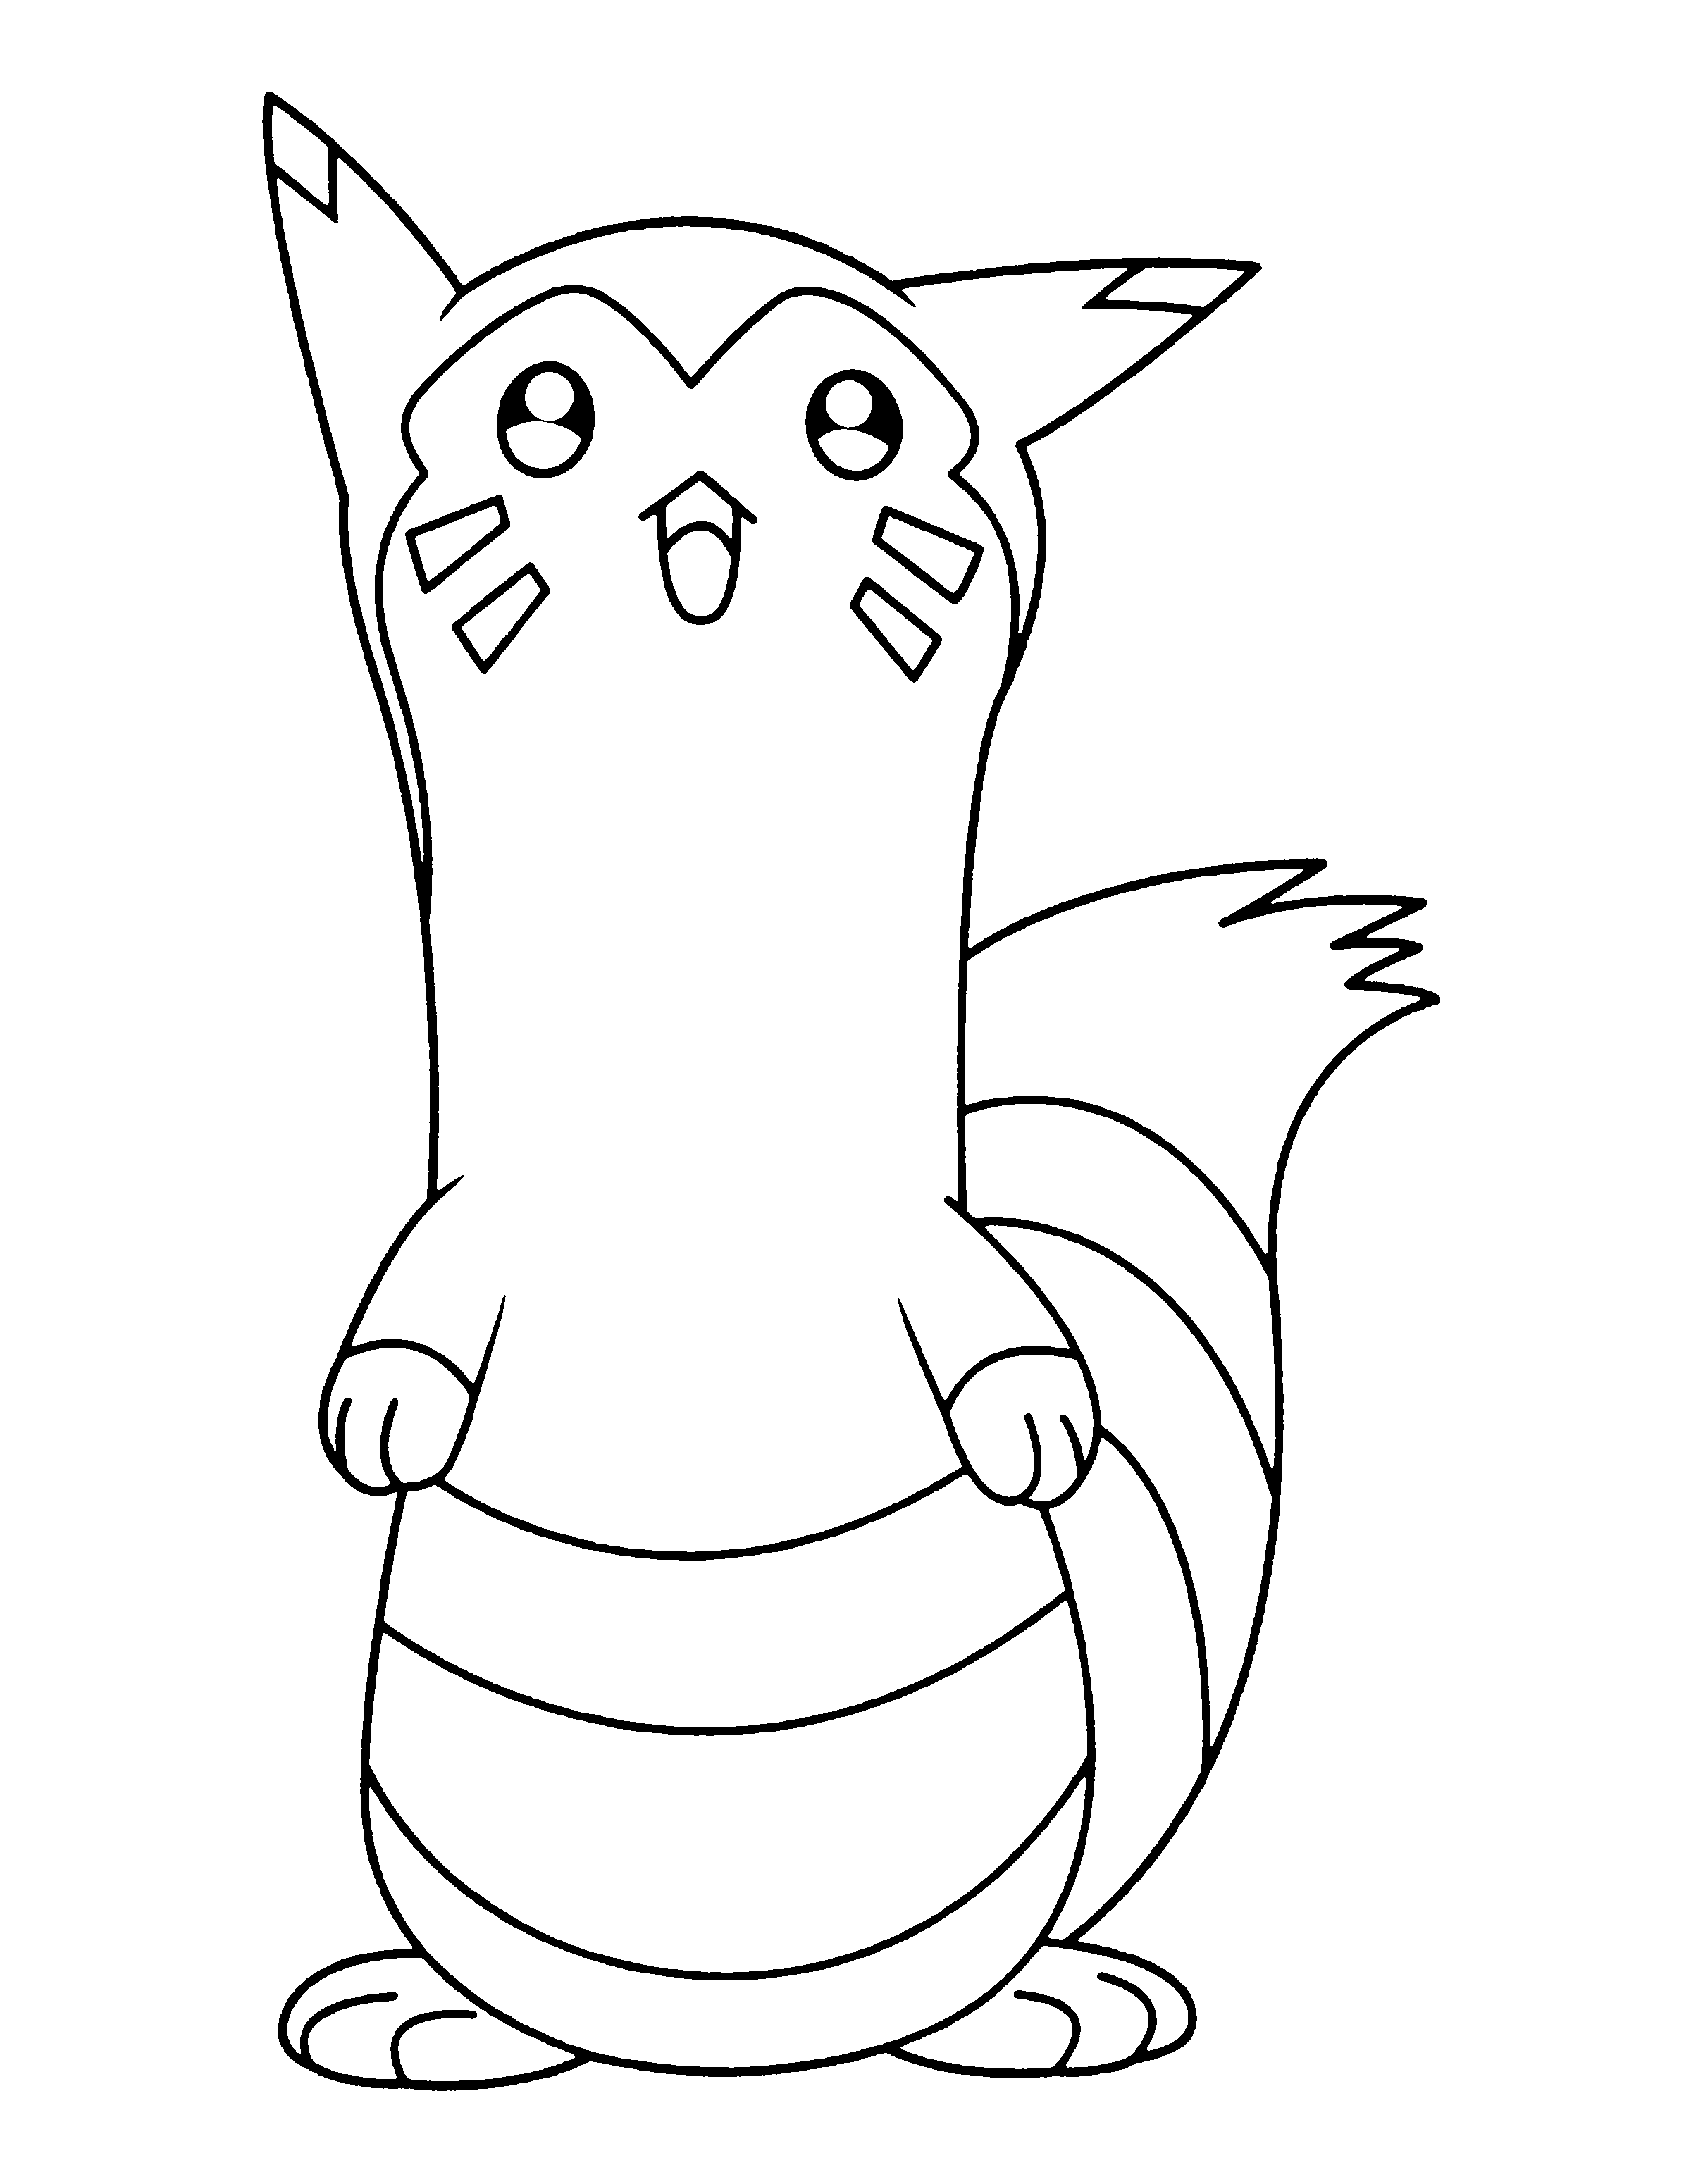 19 Furret Coloring Pages - Printable Coloring Pages